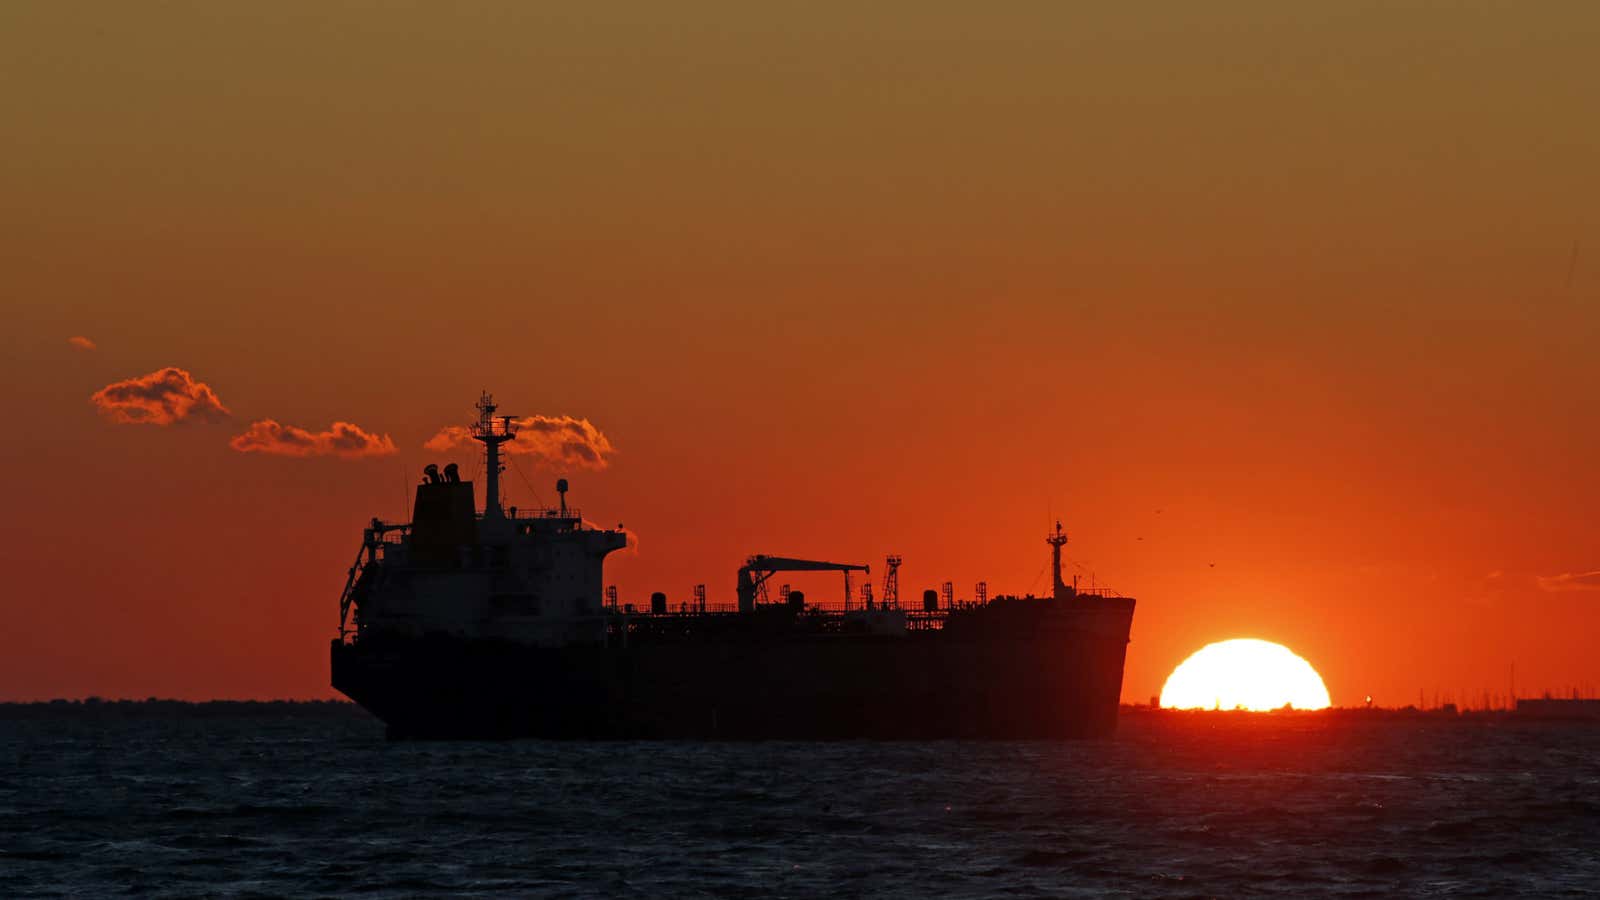 The sun might have set for advantageous crude spreads.